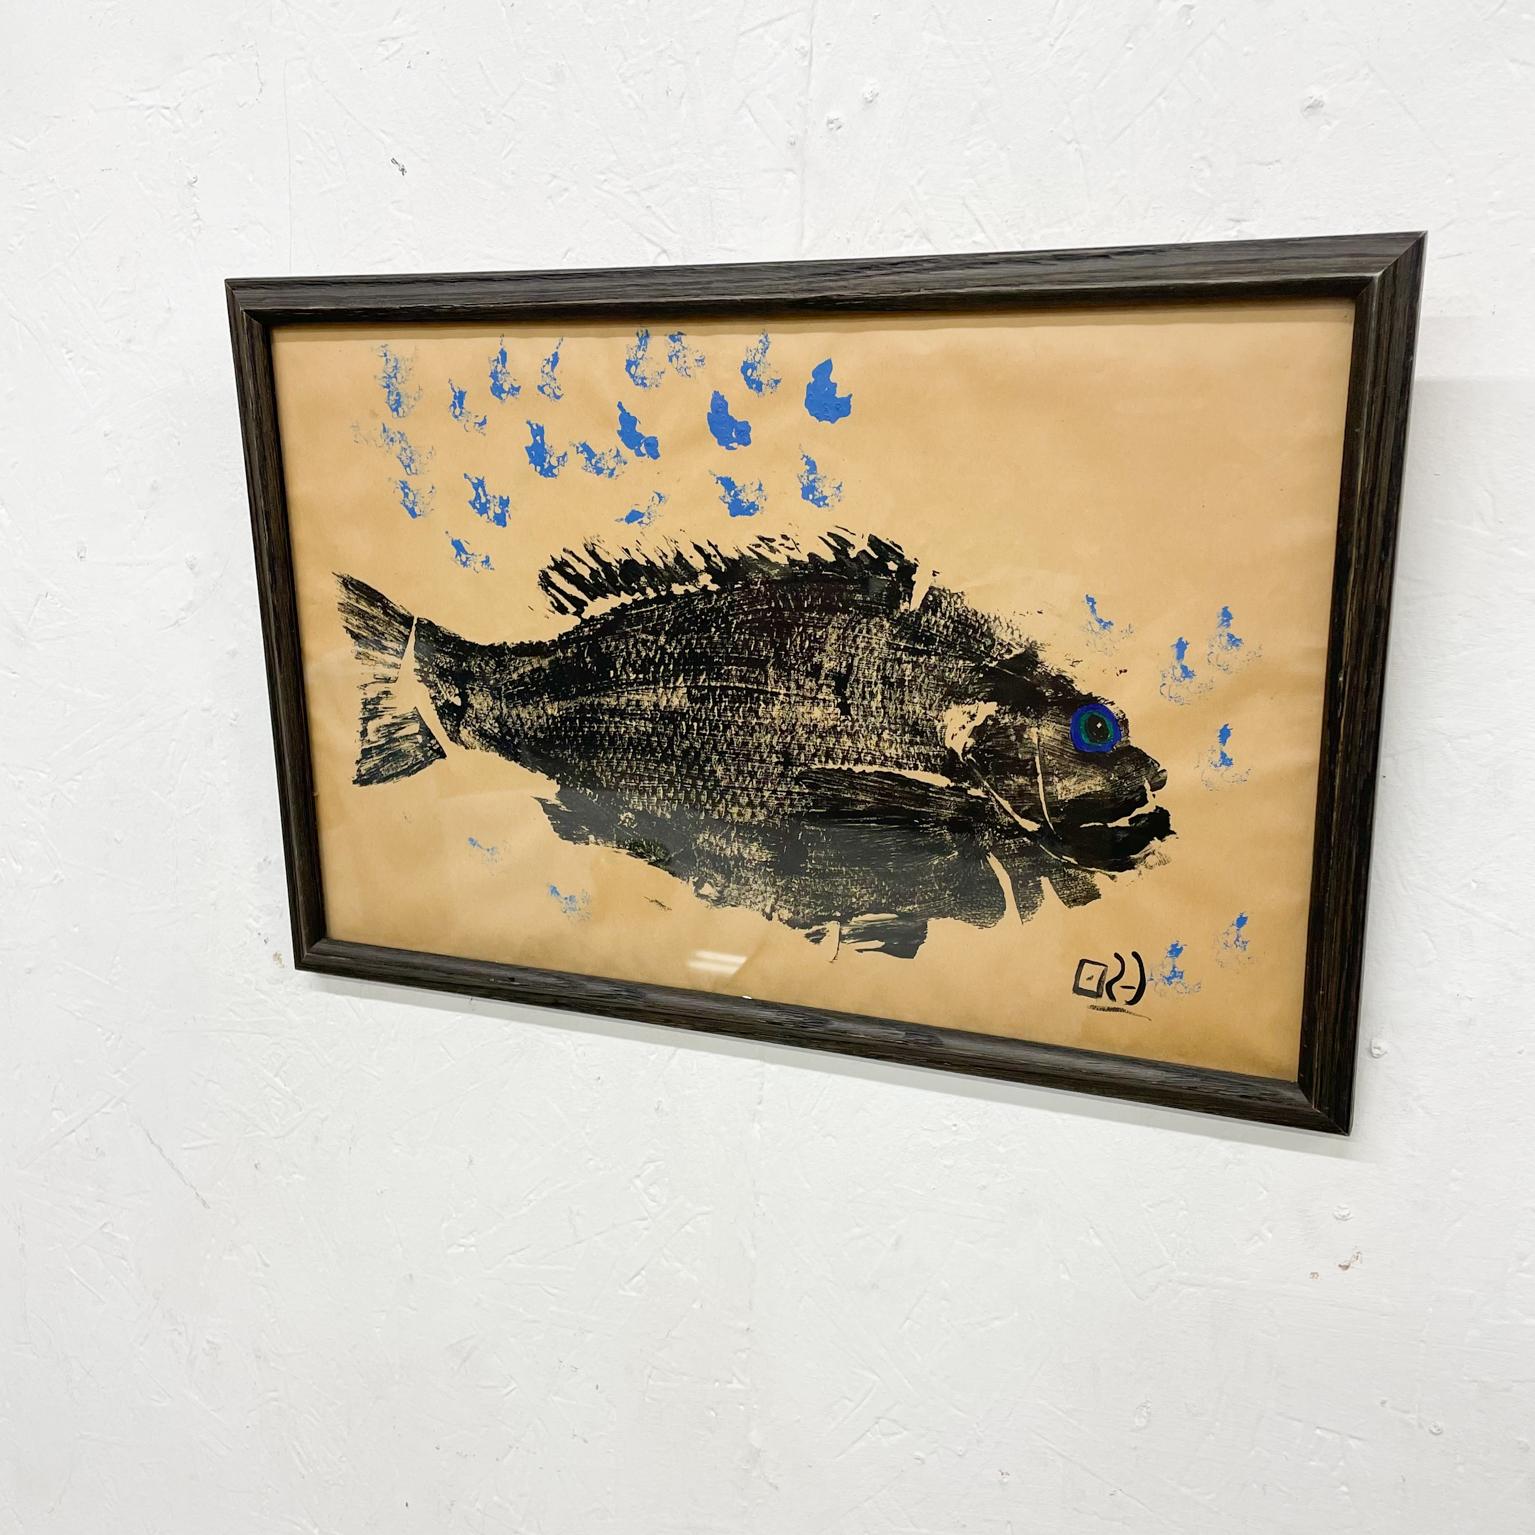 Art
From Japan Abstract Koi Fish ink on paper painting signed by Japanese artist.
Framed is wood.
Measures: 19 W x 12.63 H x .75 thick inches
Preowned original unrestored vintage condition. 
See images provided.
  